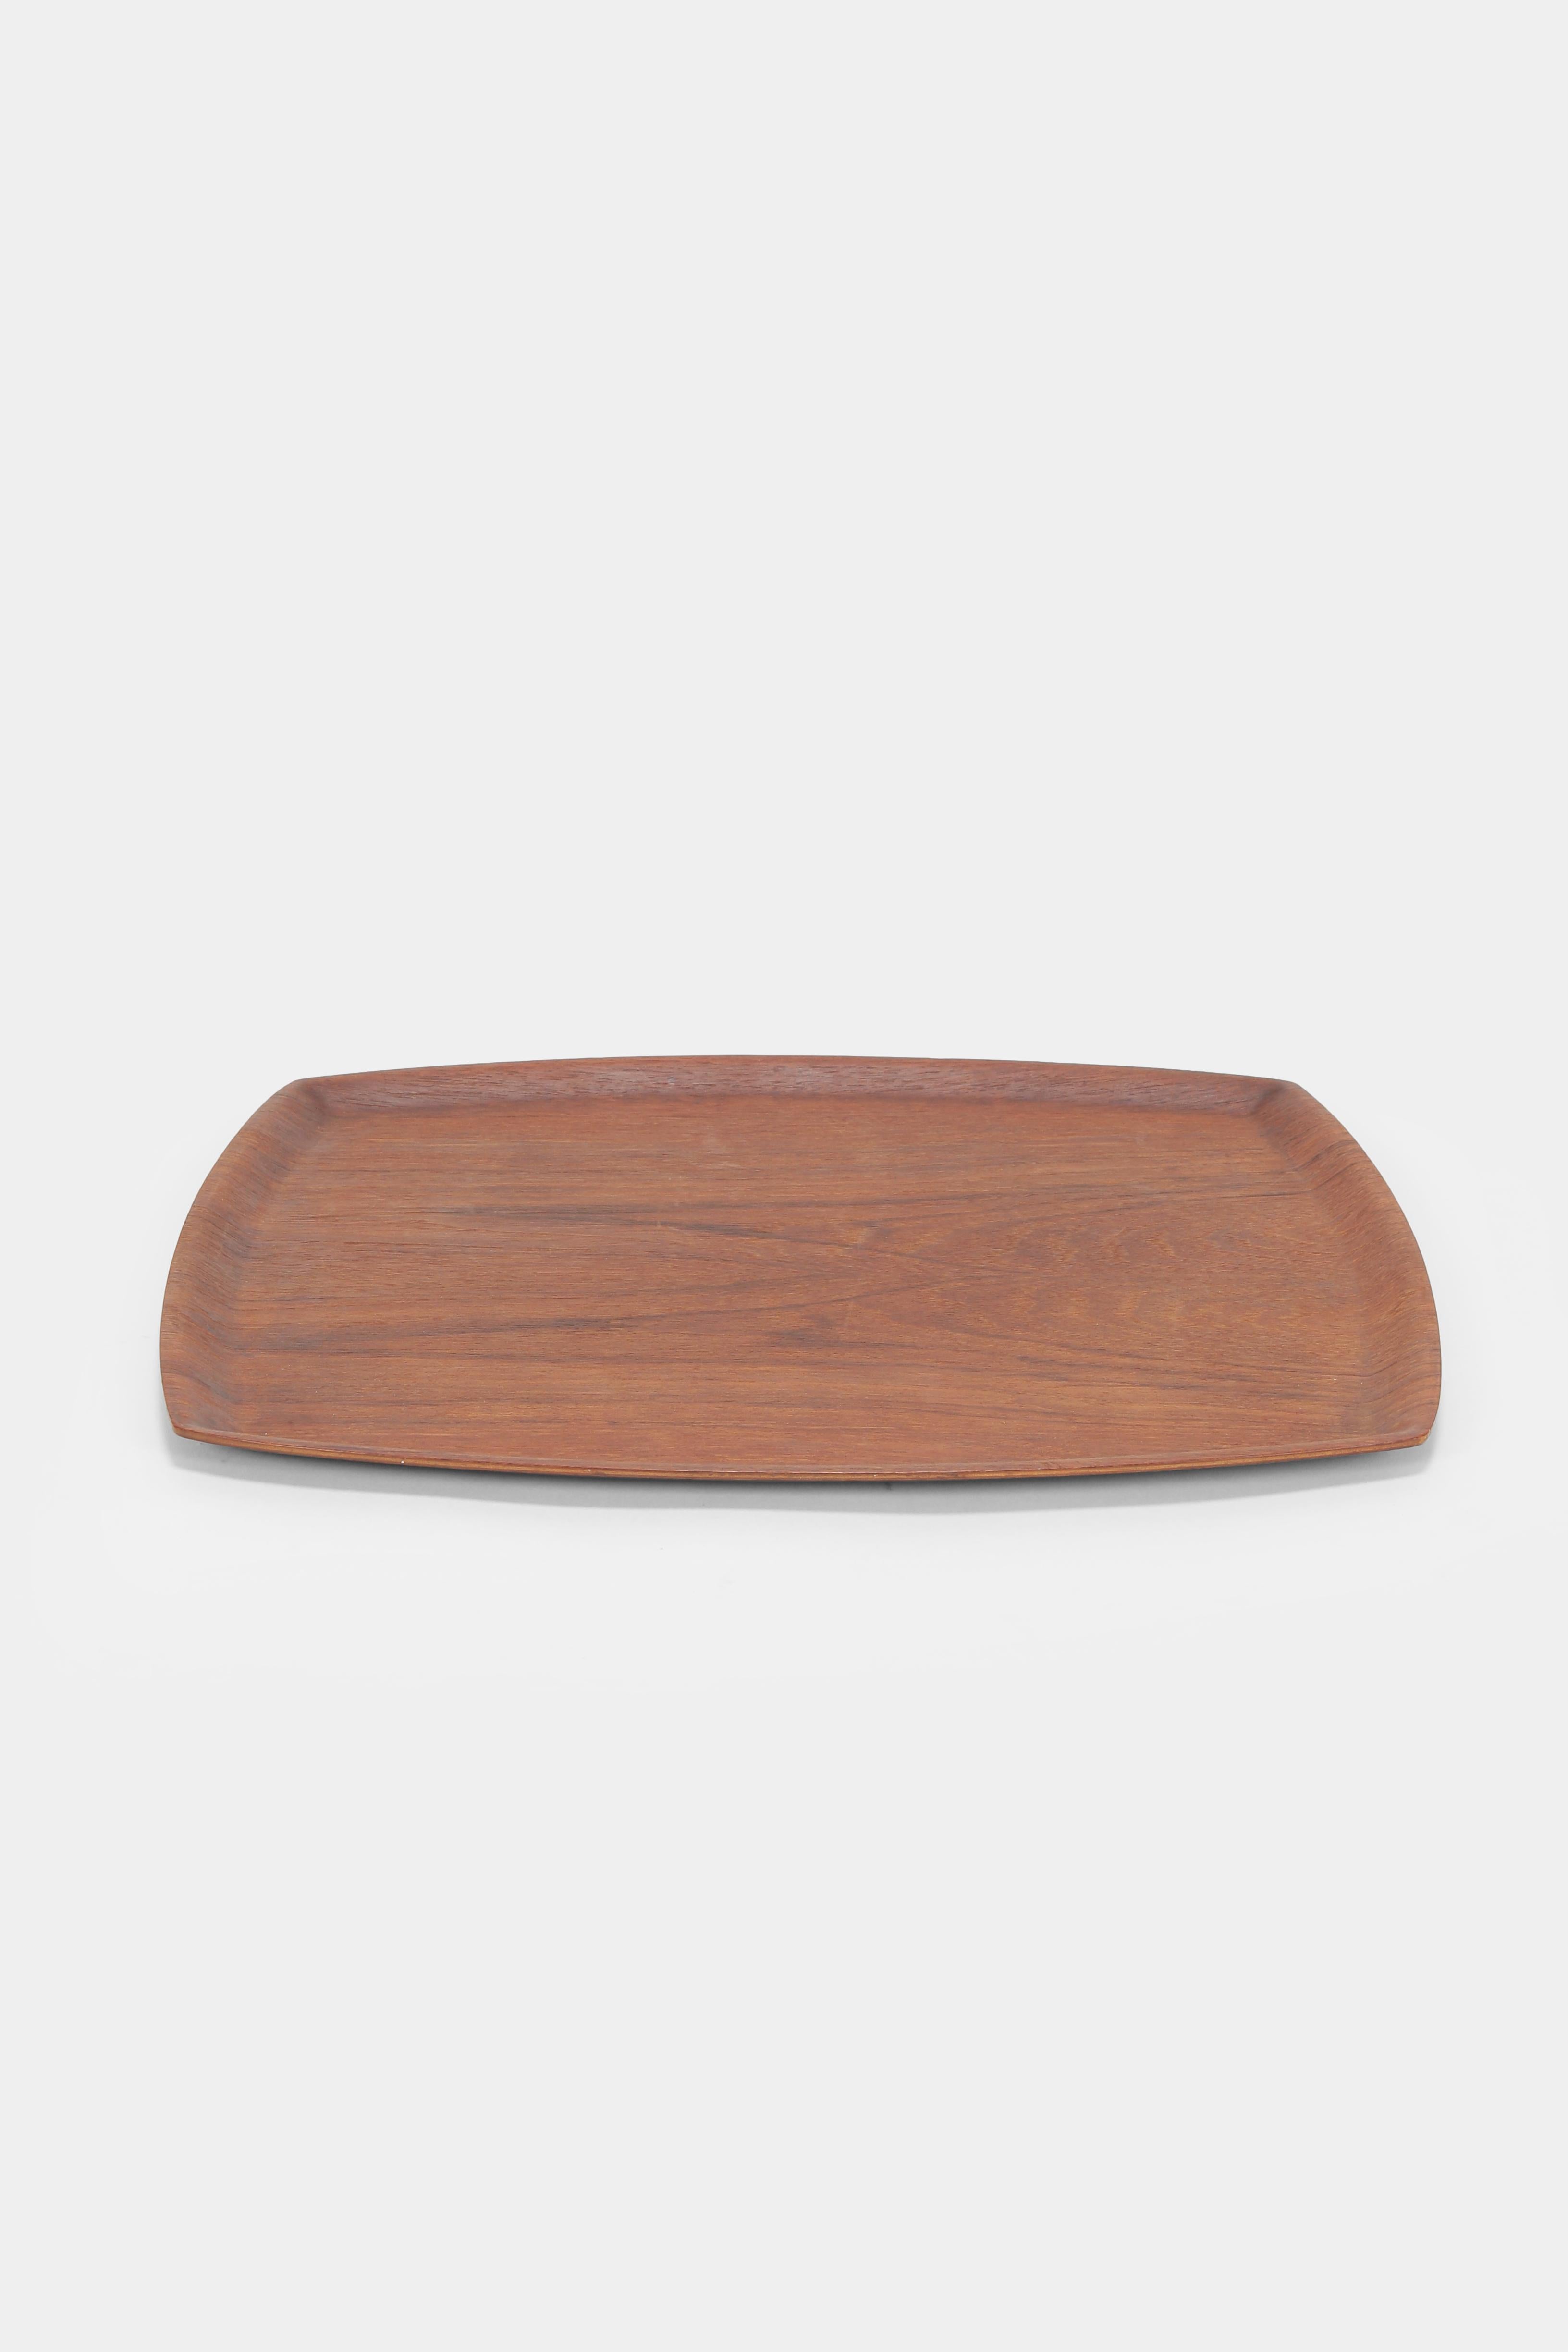 Serving tray manufactured in the 1960s in Sweden. Made of teak wood with slightly curved frames. Marked on the bottom with made in Sweden.